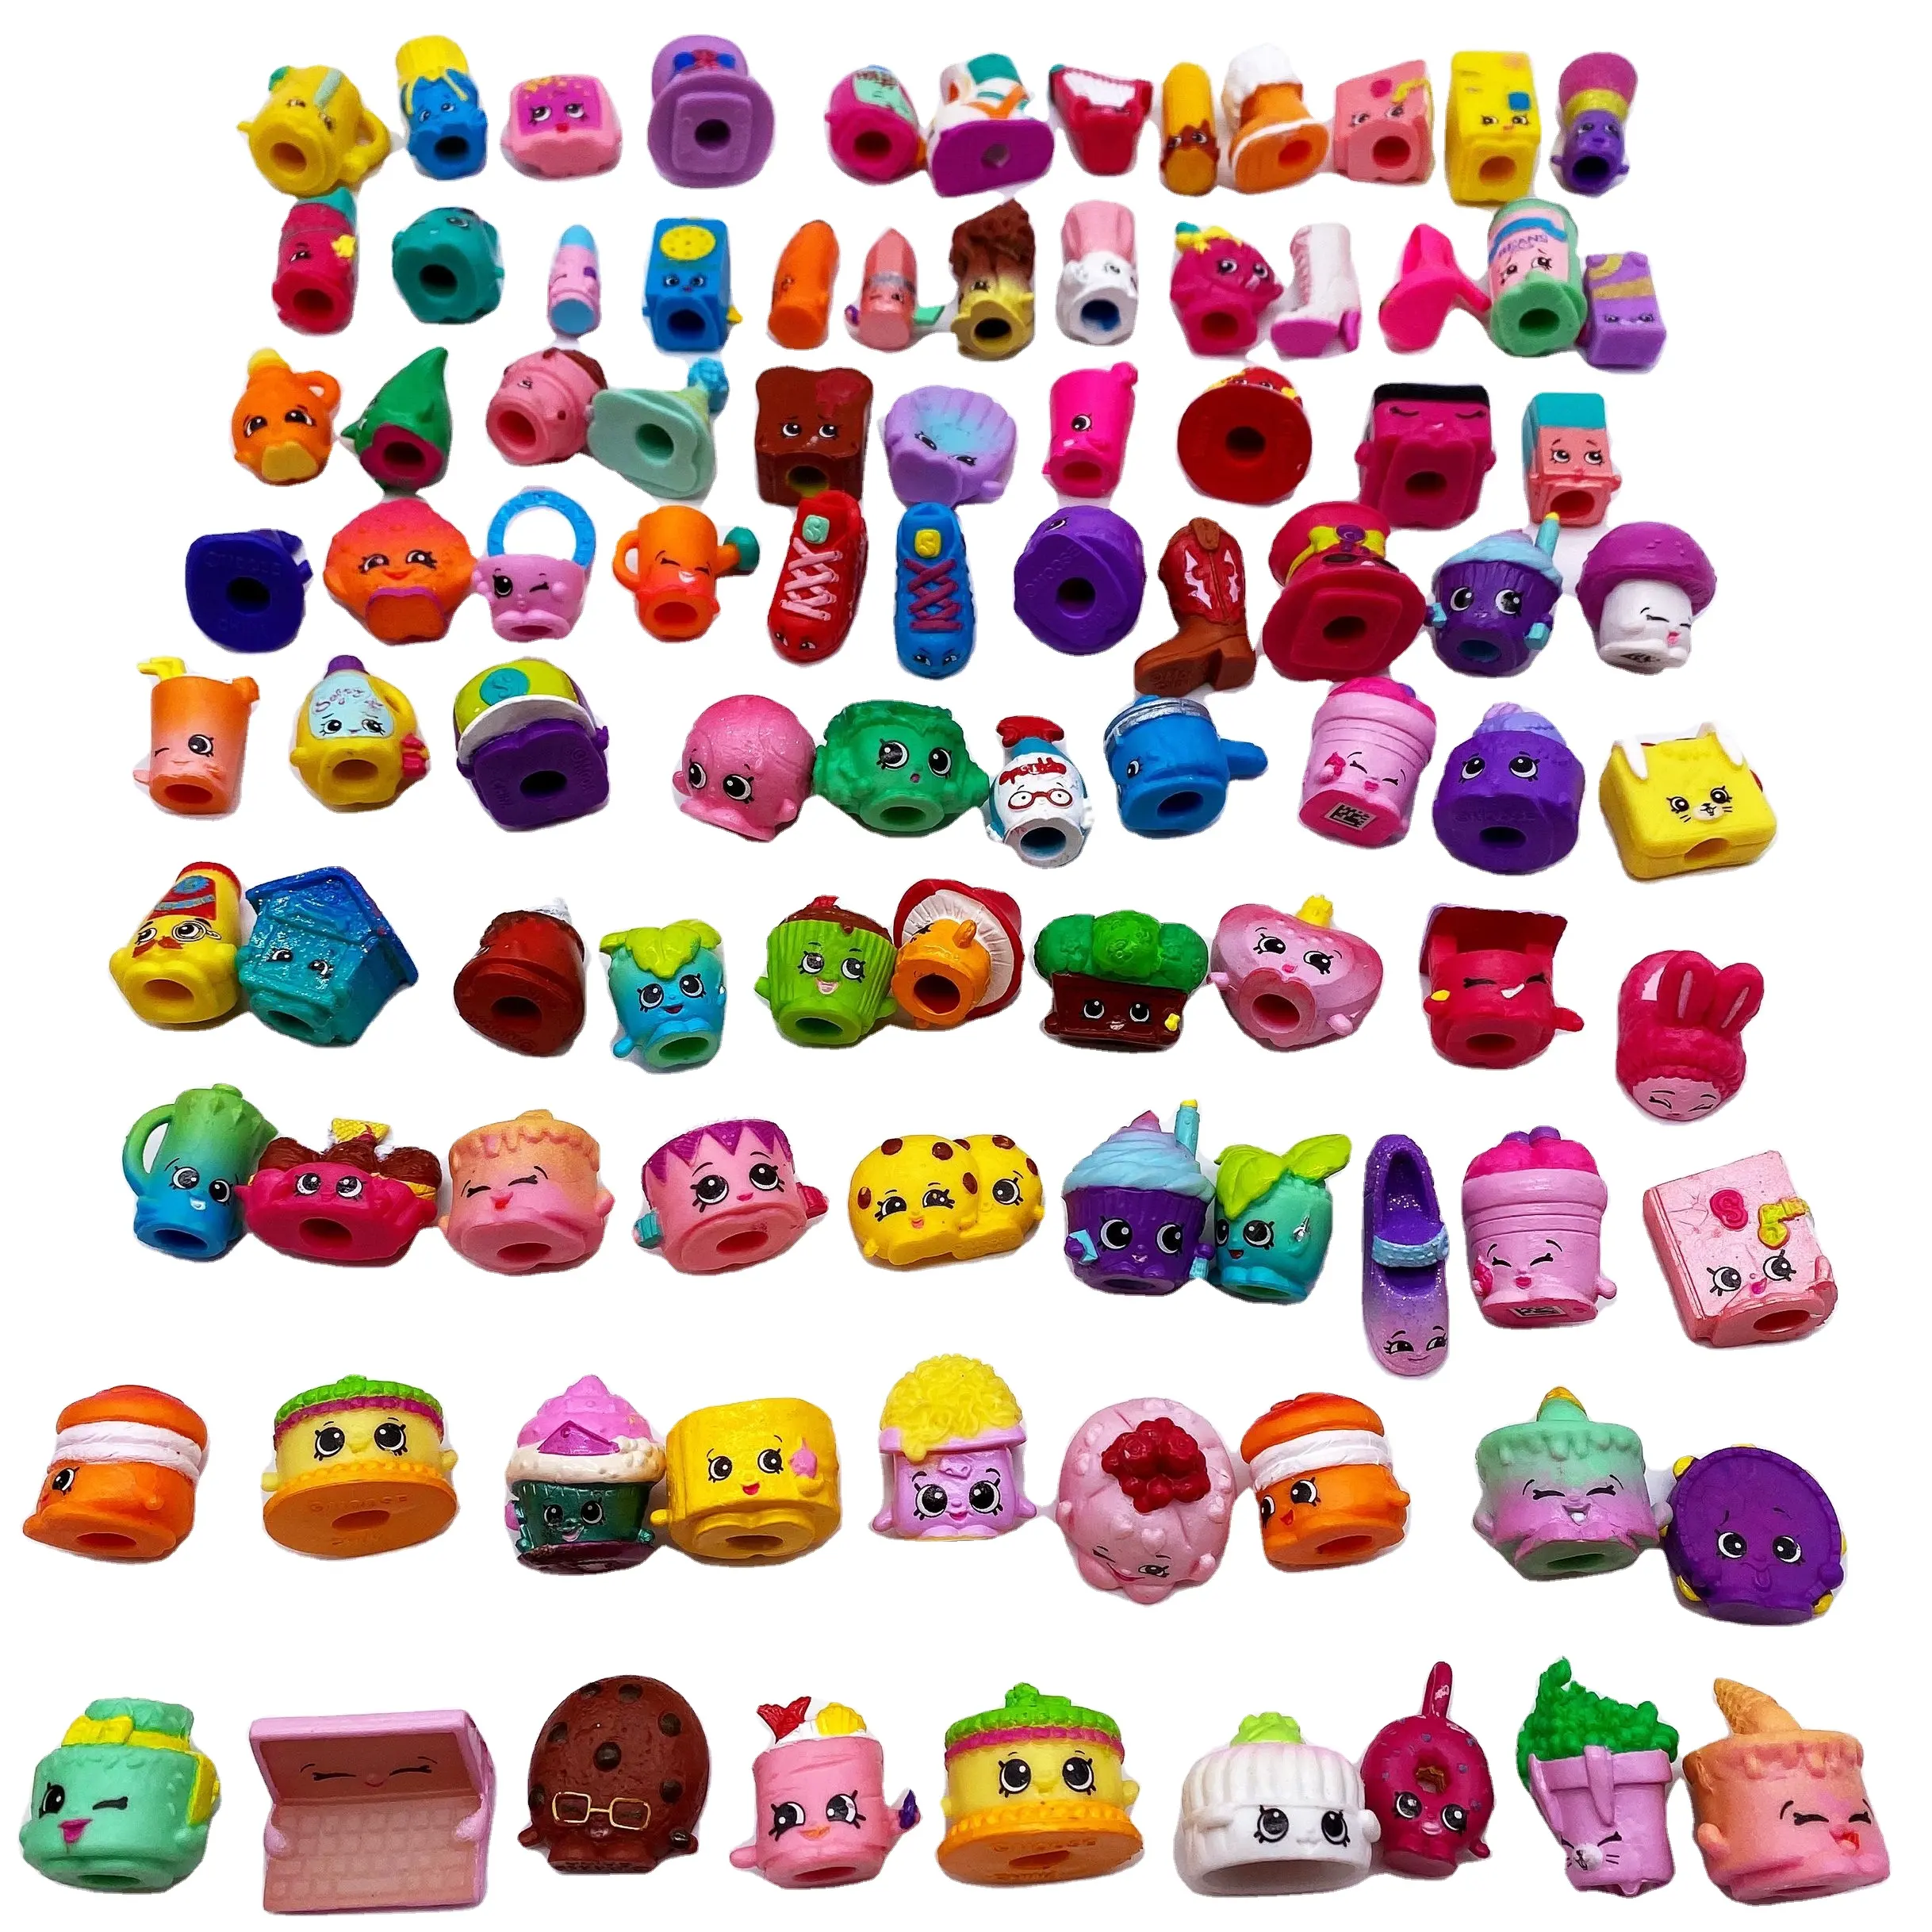 2-3 cm toys mini doll Plastic action figures Children small Mini Toy family shop toys many styles mix